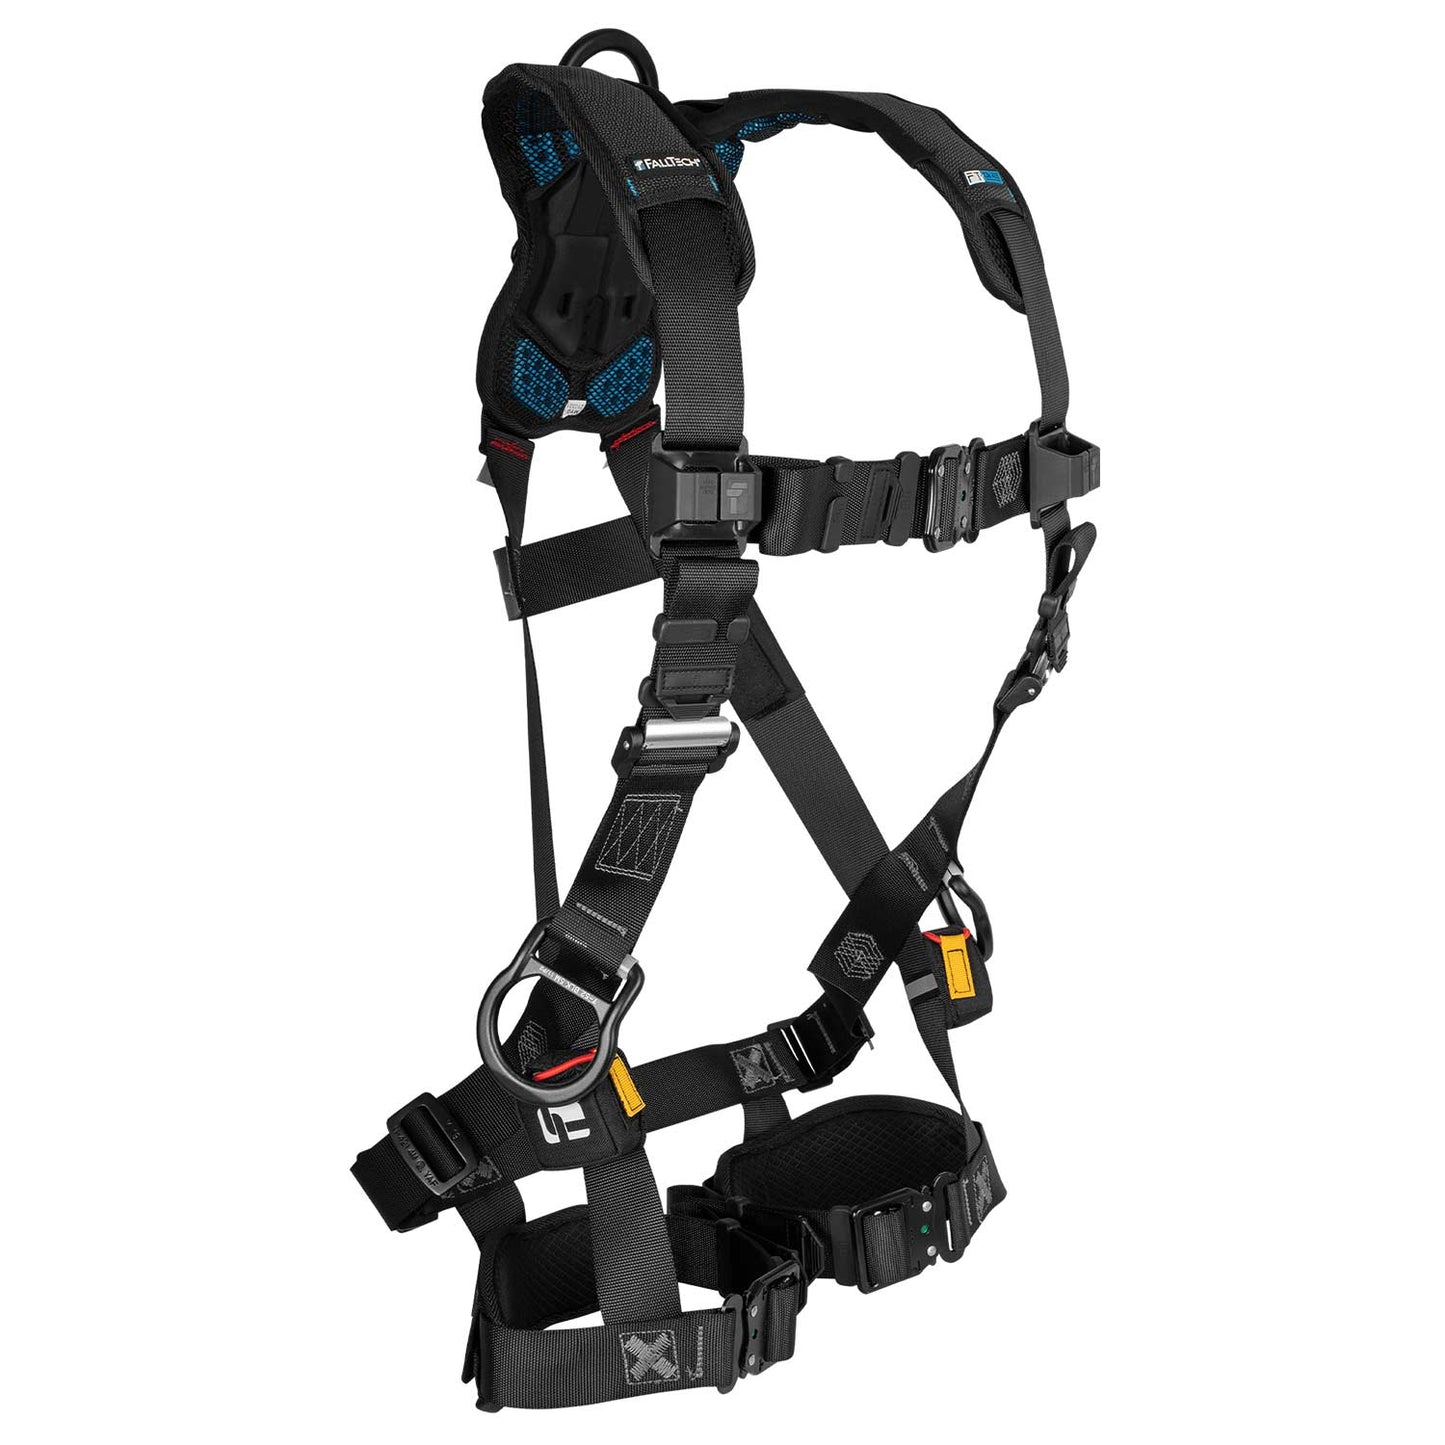 FallTech FT-One Fit Women's Safety Harness w/ Trauma Straps | Non-Belted | S | 8129QCS